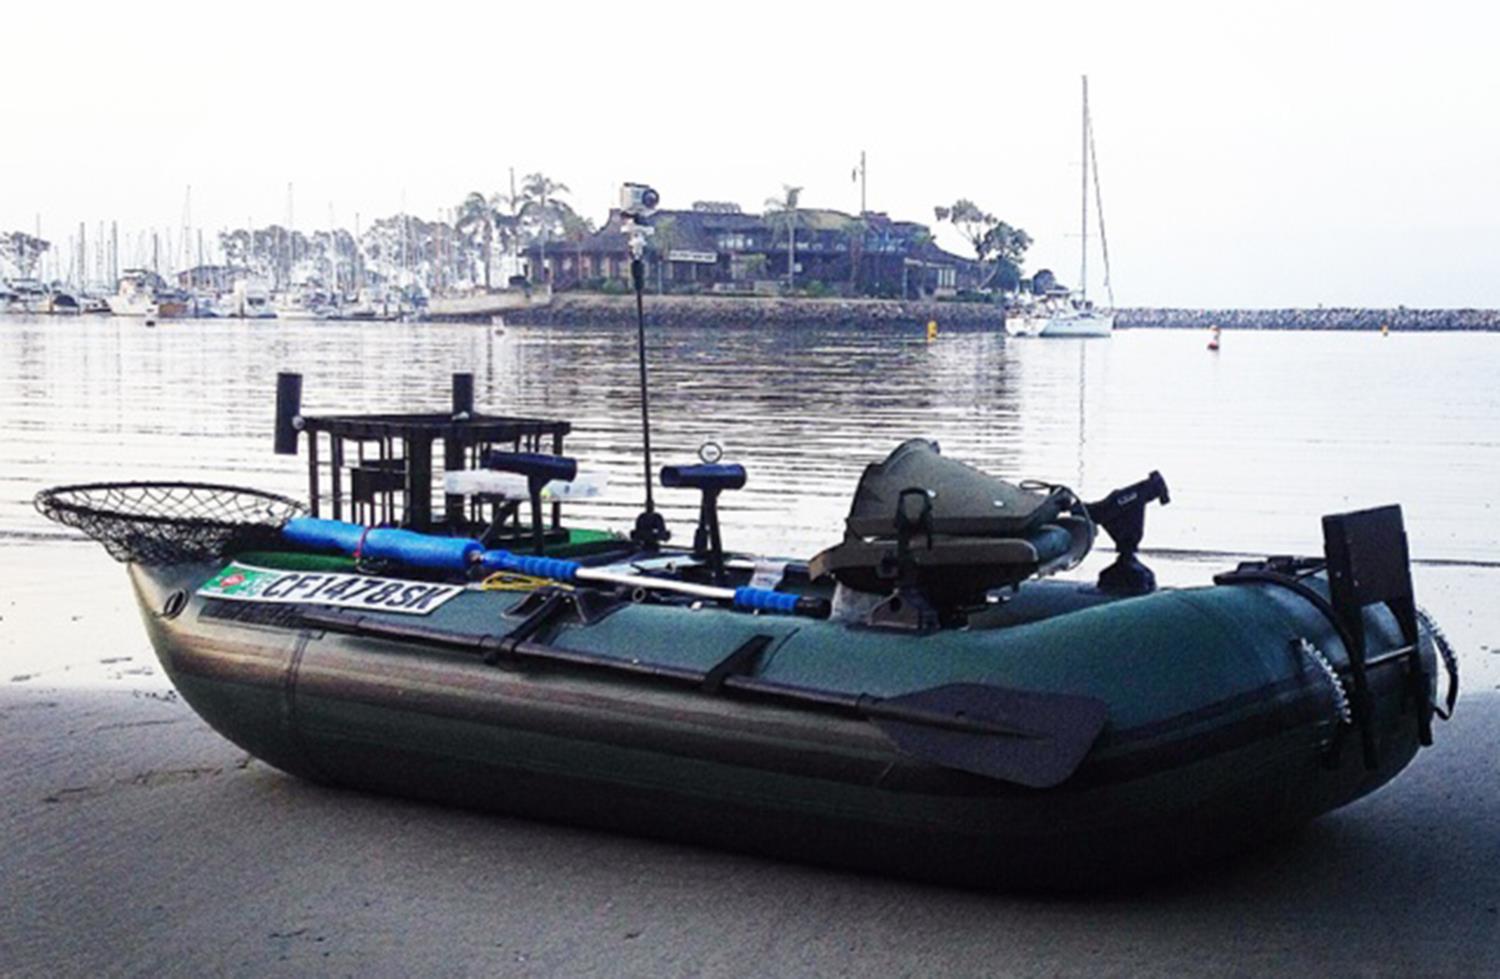 Sea Eagle 285fpb 1 person Inflatable Fishing Boat. Package Prices